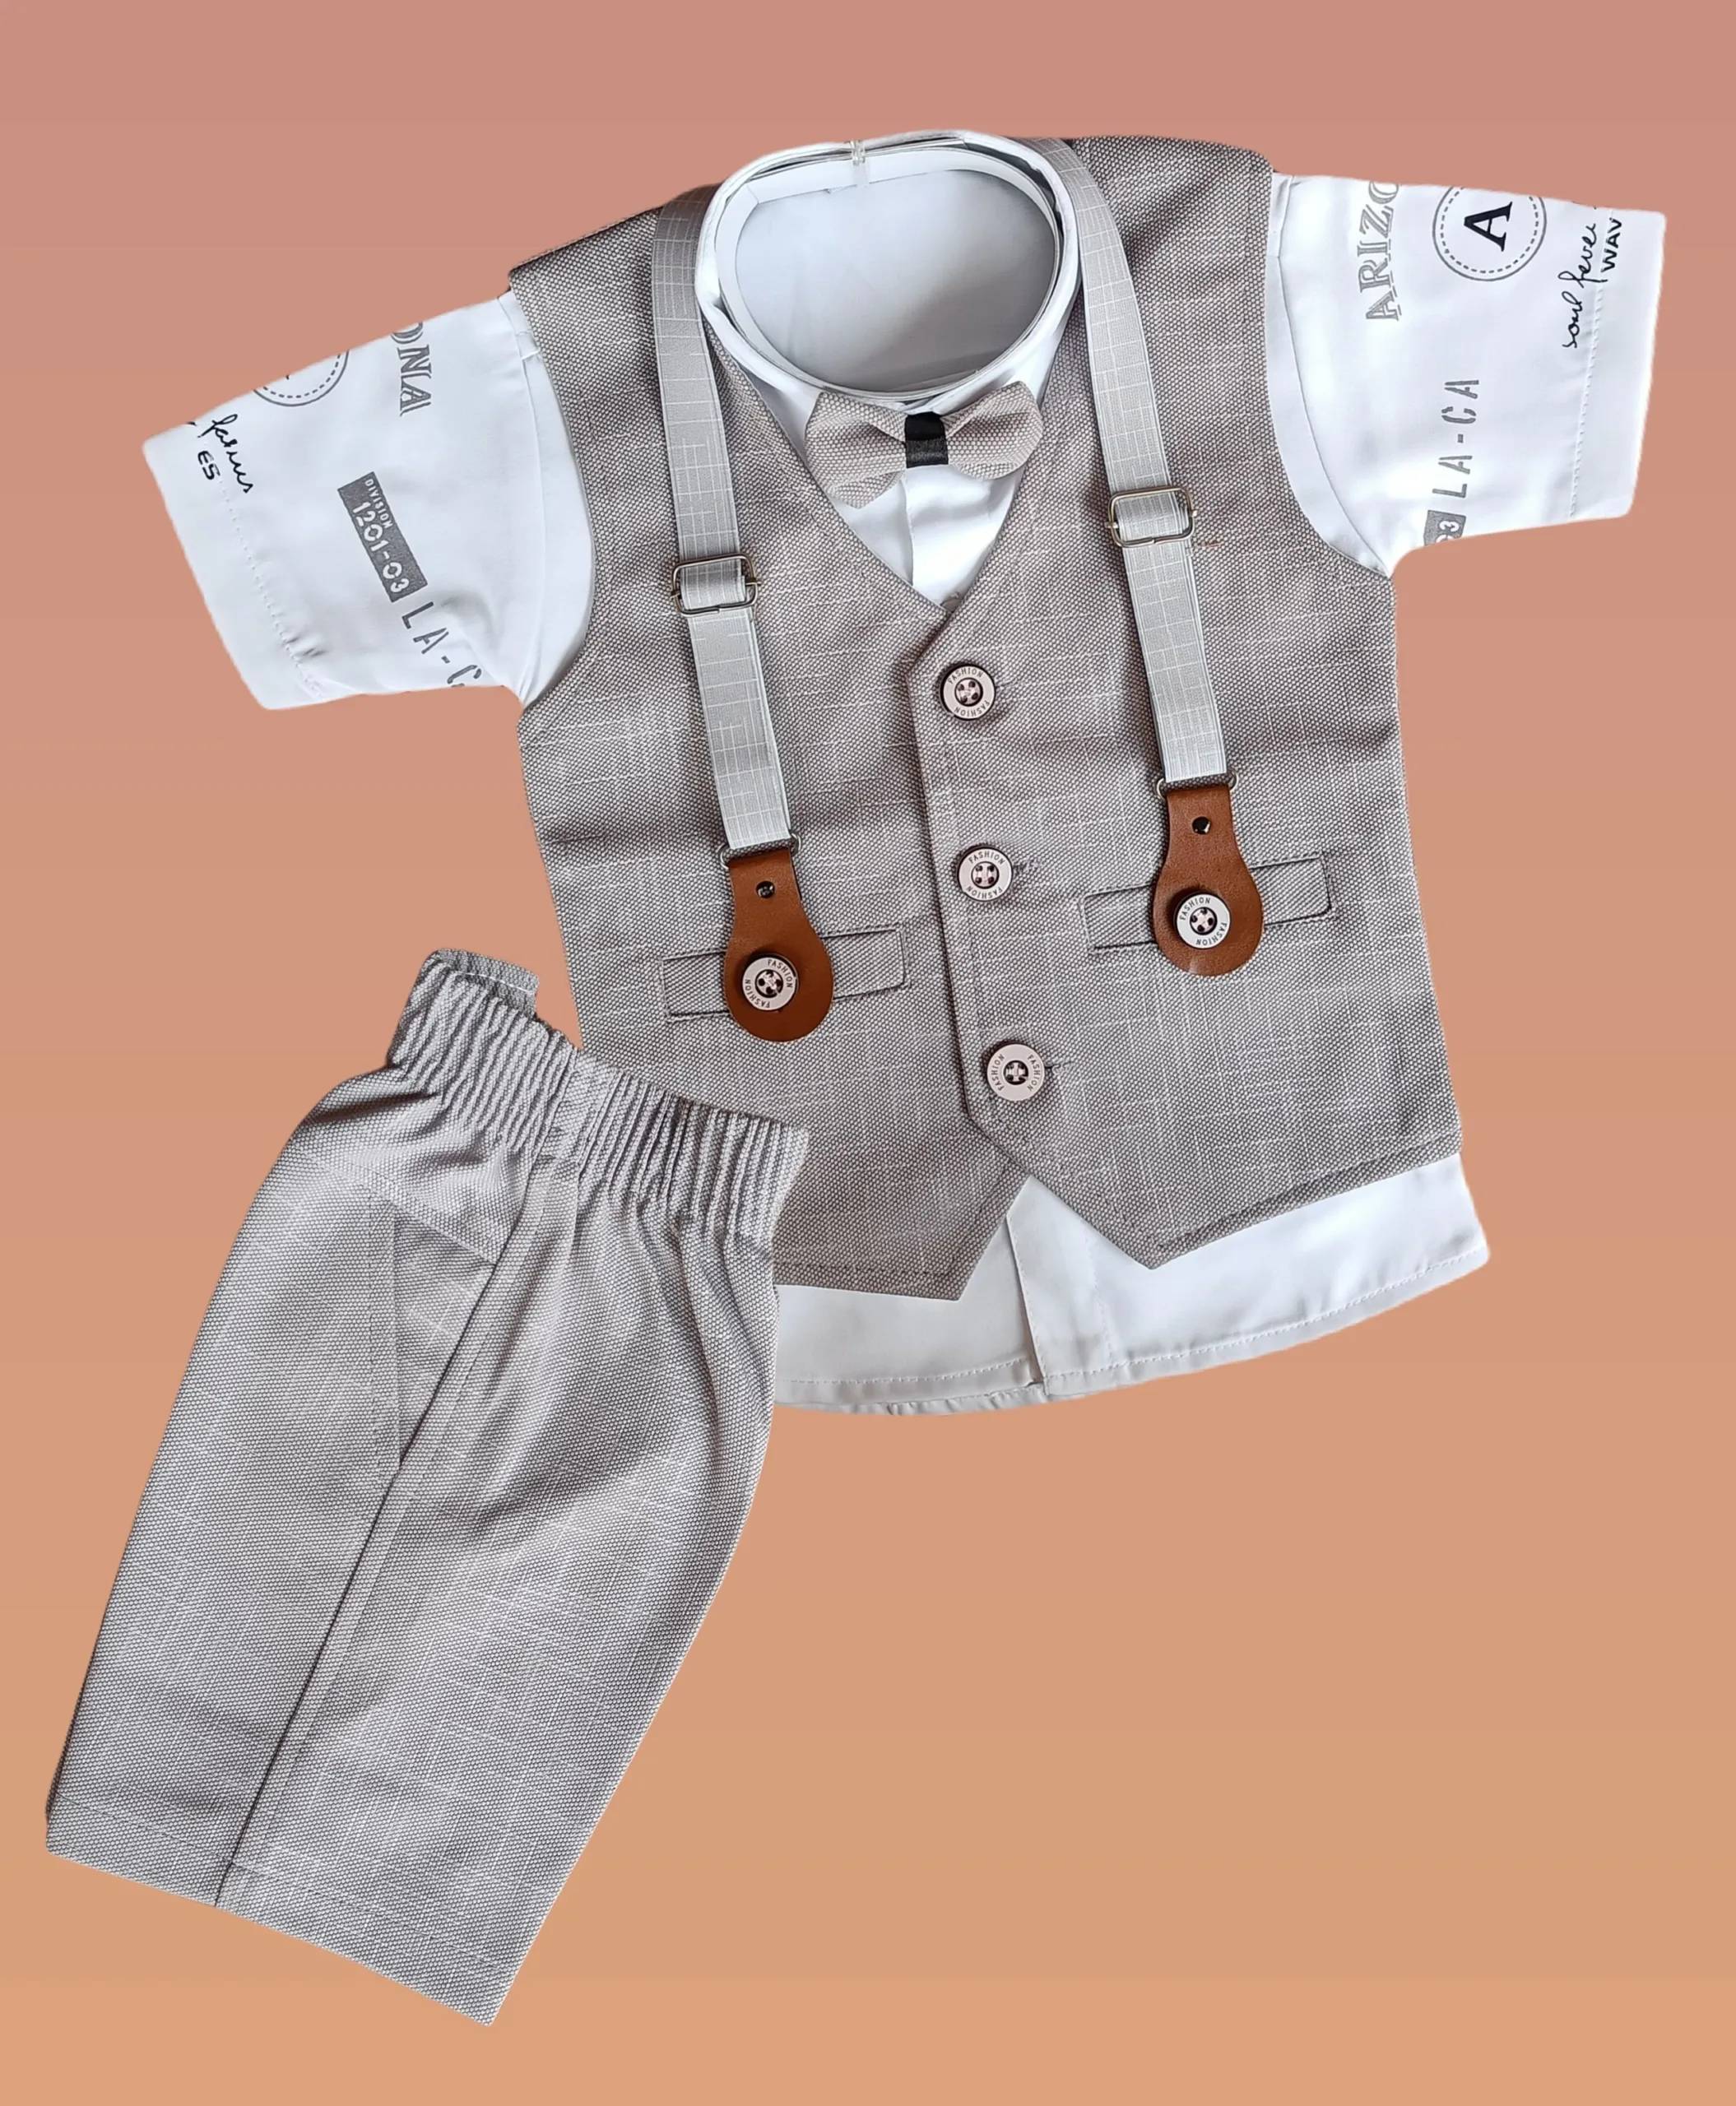 Buy Pramukh NX Baby boy Checks Dungaree & White Shirt | Dress for Baby boy  | Clothes Dungaree set for Baby boy Color- White (1-2 years) at Amazon.in